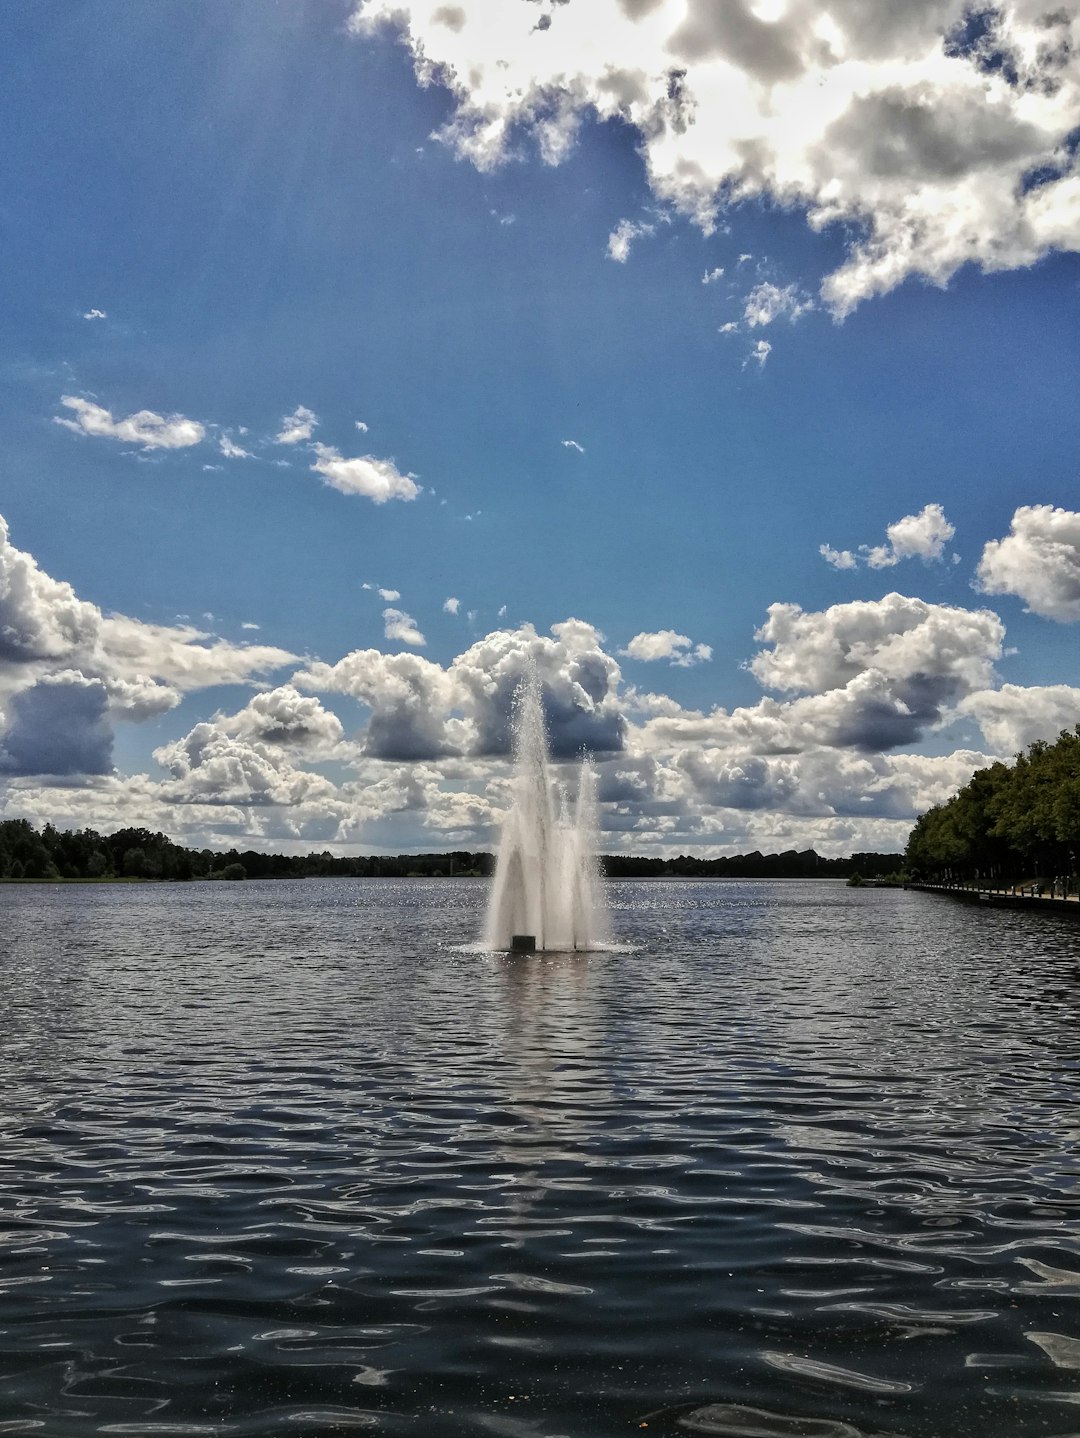 water fountain on body of water under blue sky and white clouds during daytime